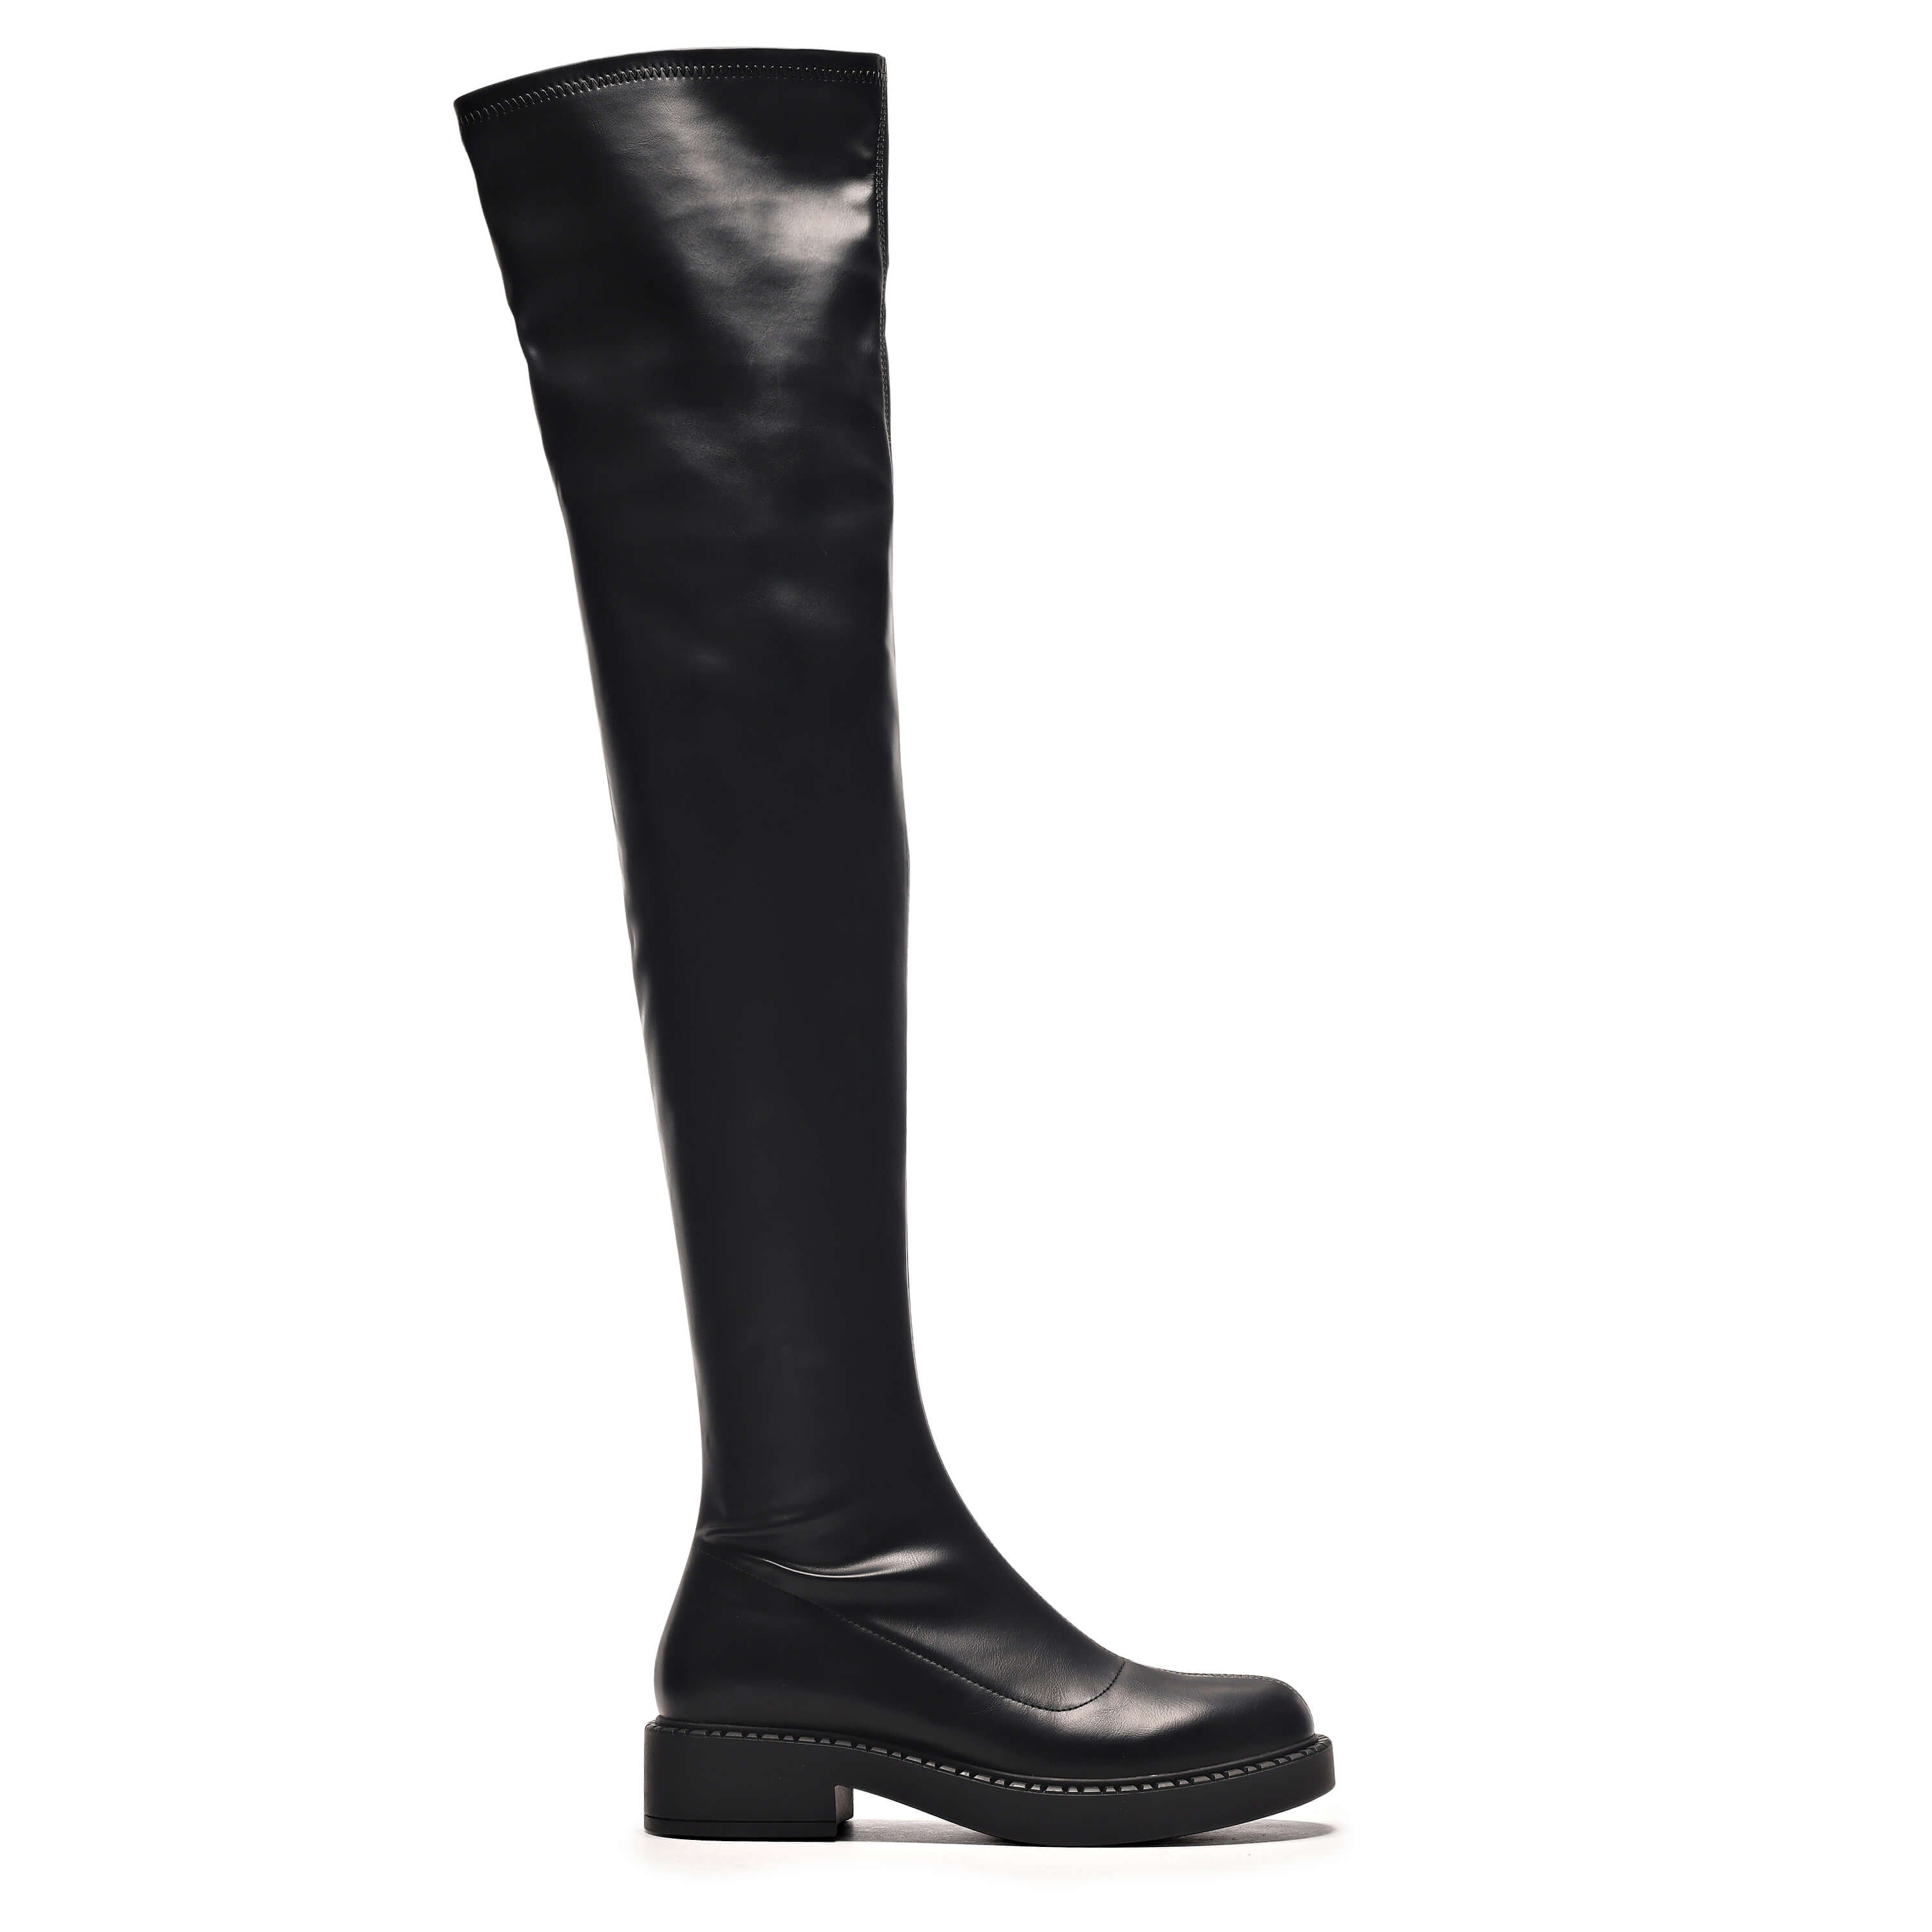 The Commander Stretch Thigh High Boots – KOI footwear